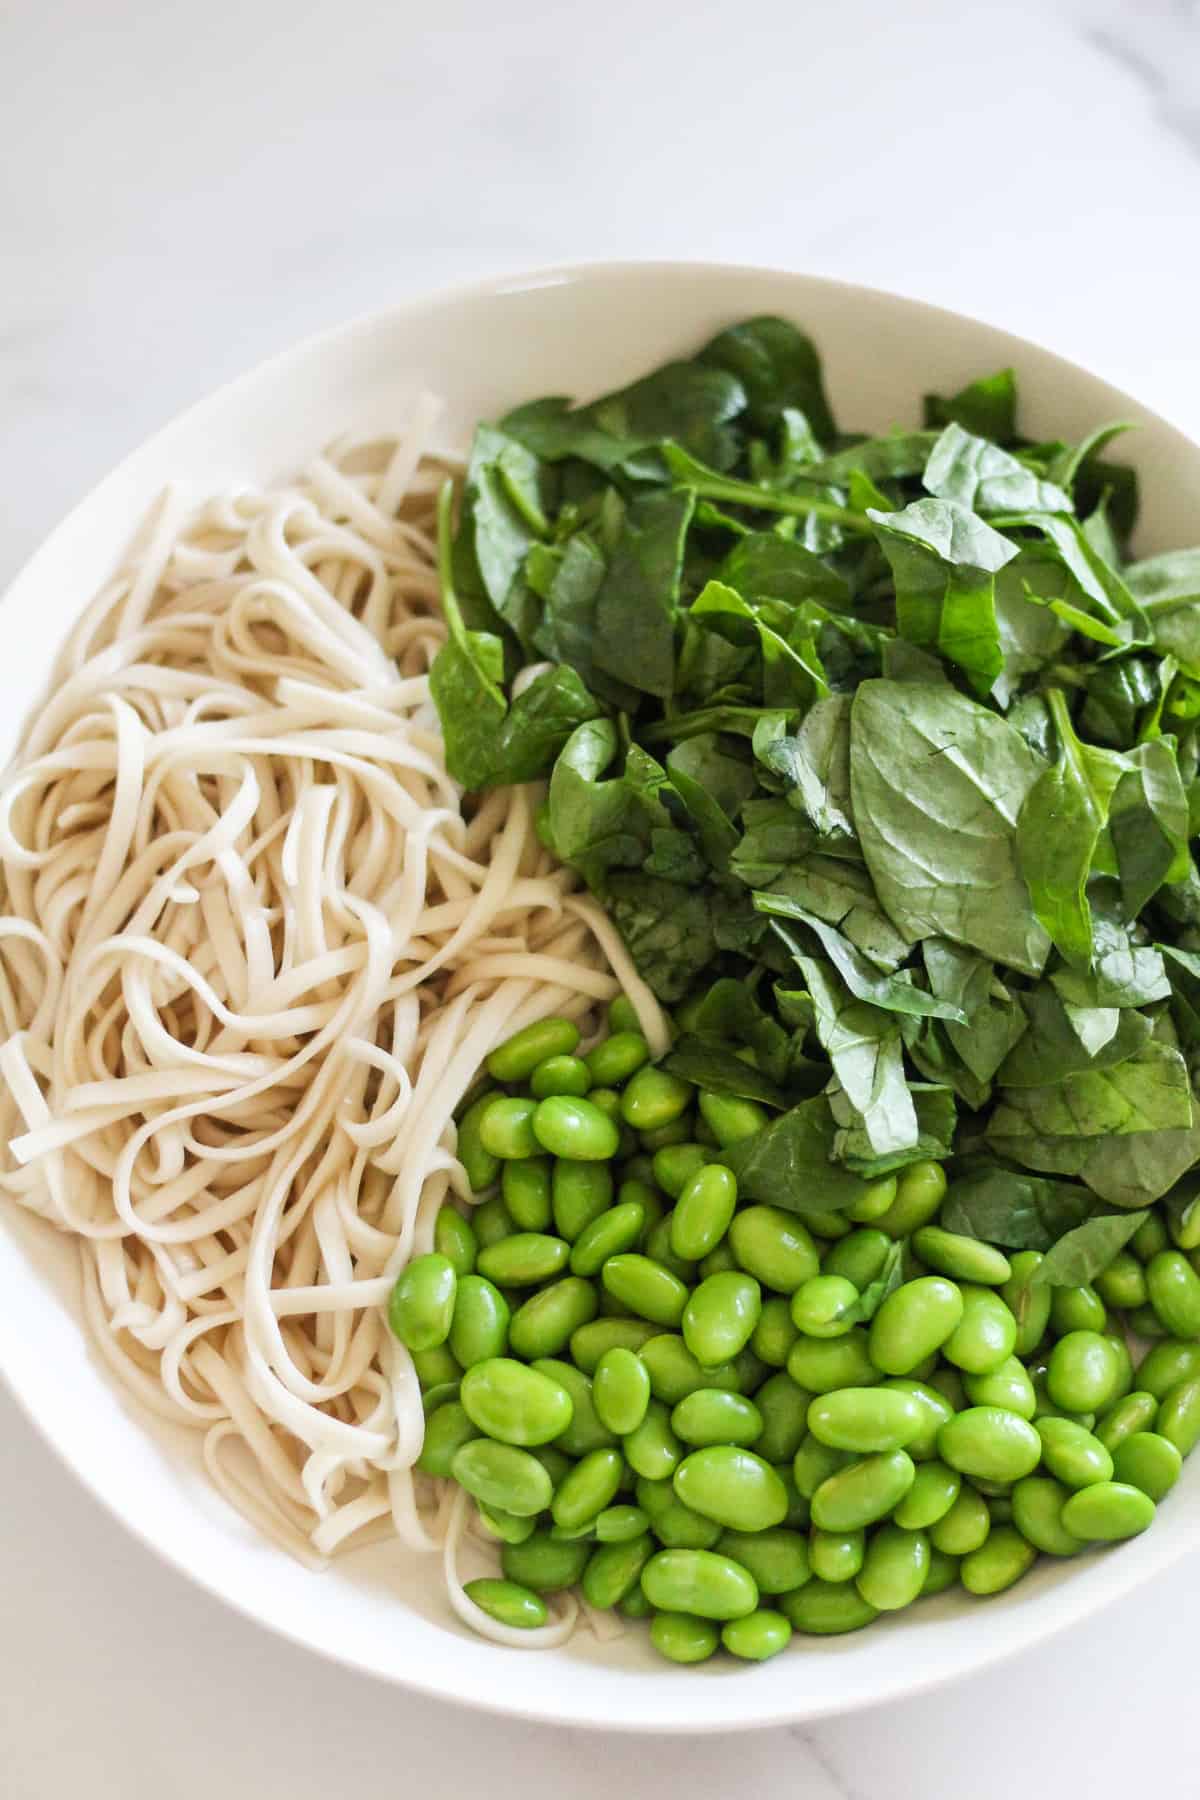 Noodles, edamame, and chopped spinach in a white bowl.